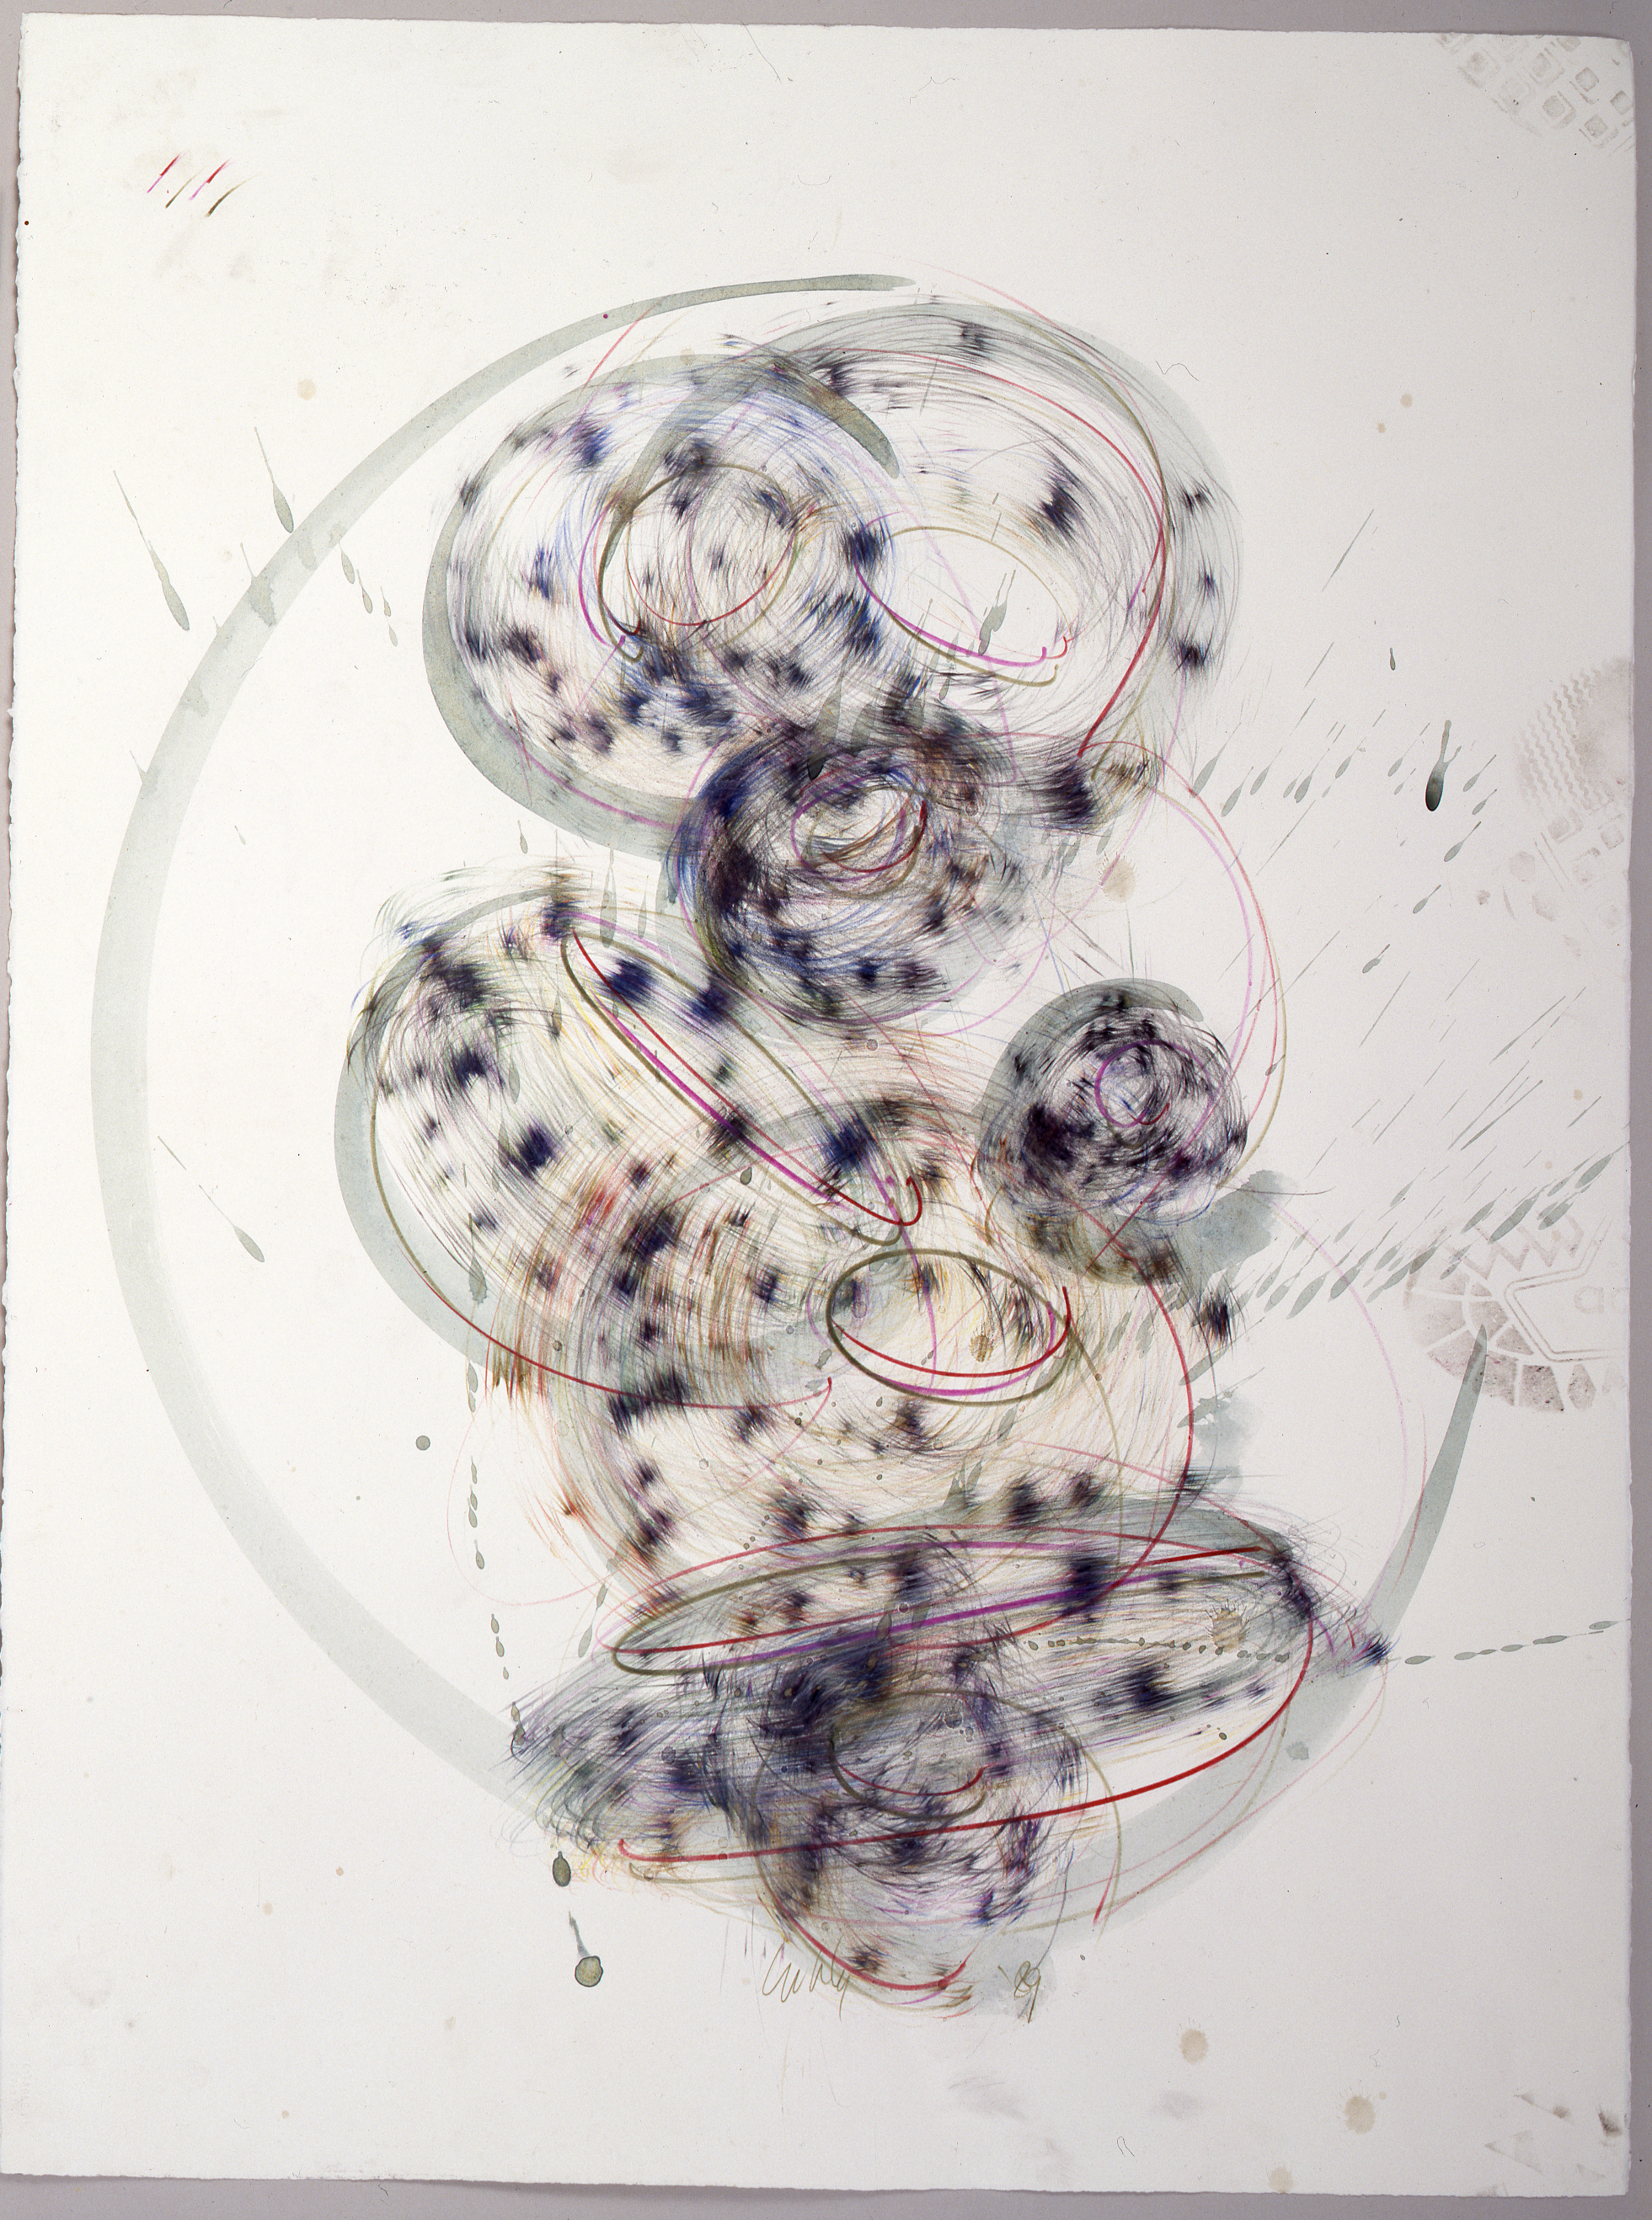  Dale Chihuly,  Niijima Drawing #15  ,&nbsp; (1989, ink on paper, 30 x 22 inches), DC.376 